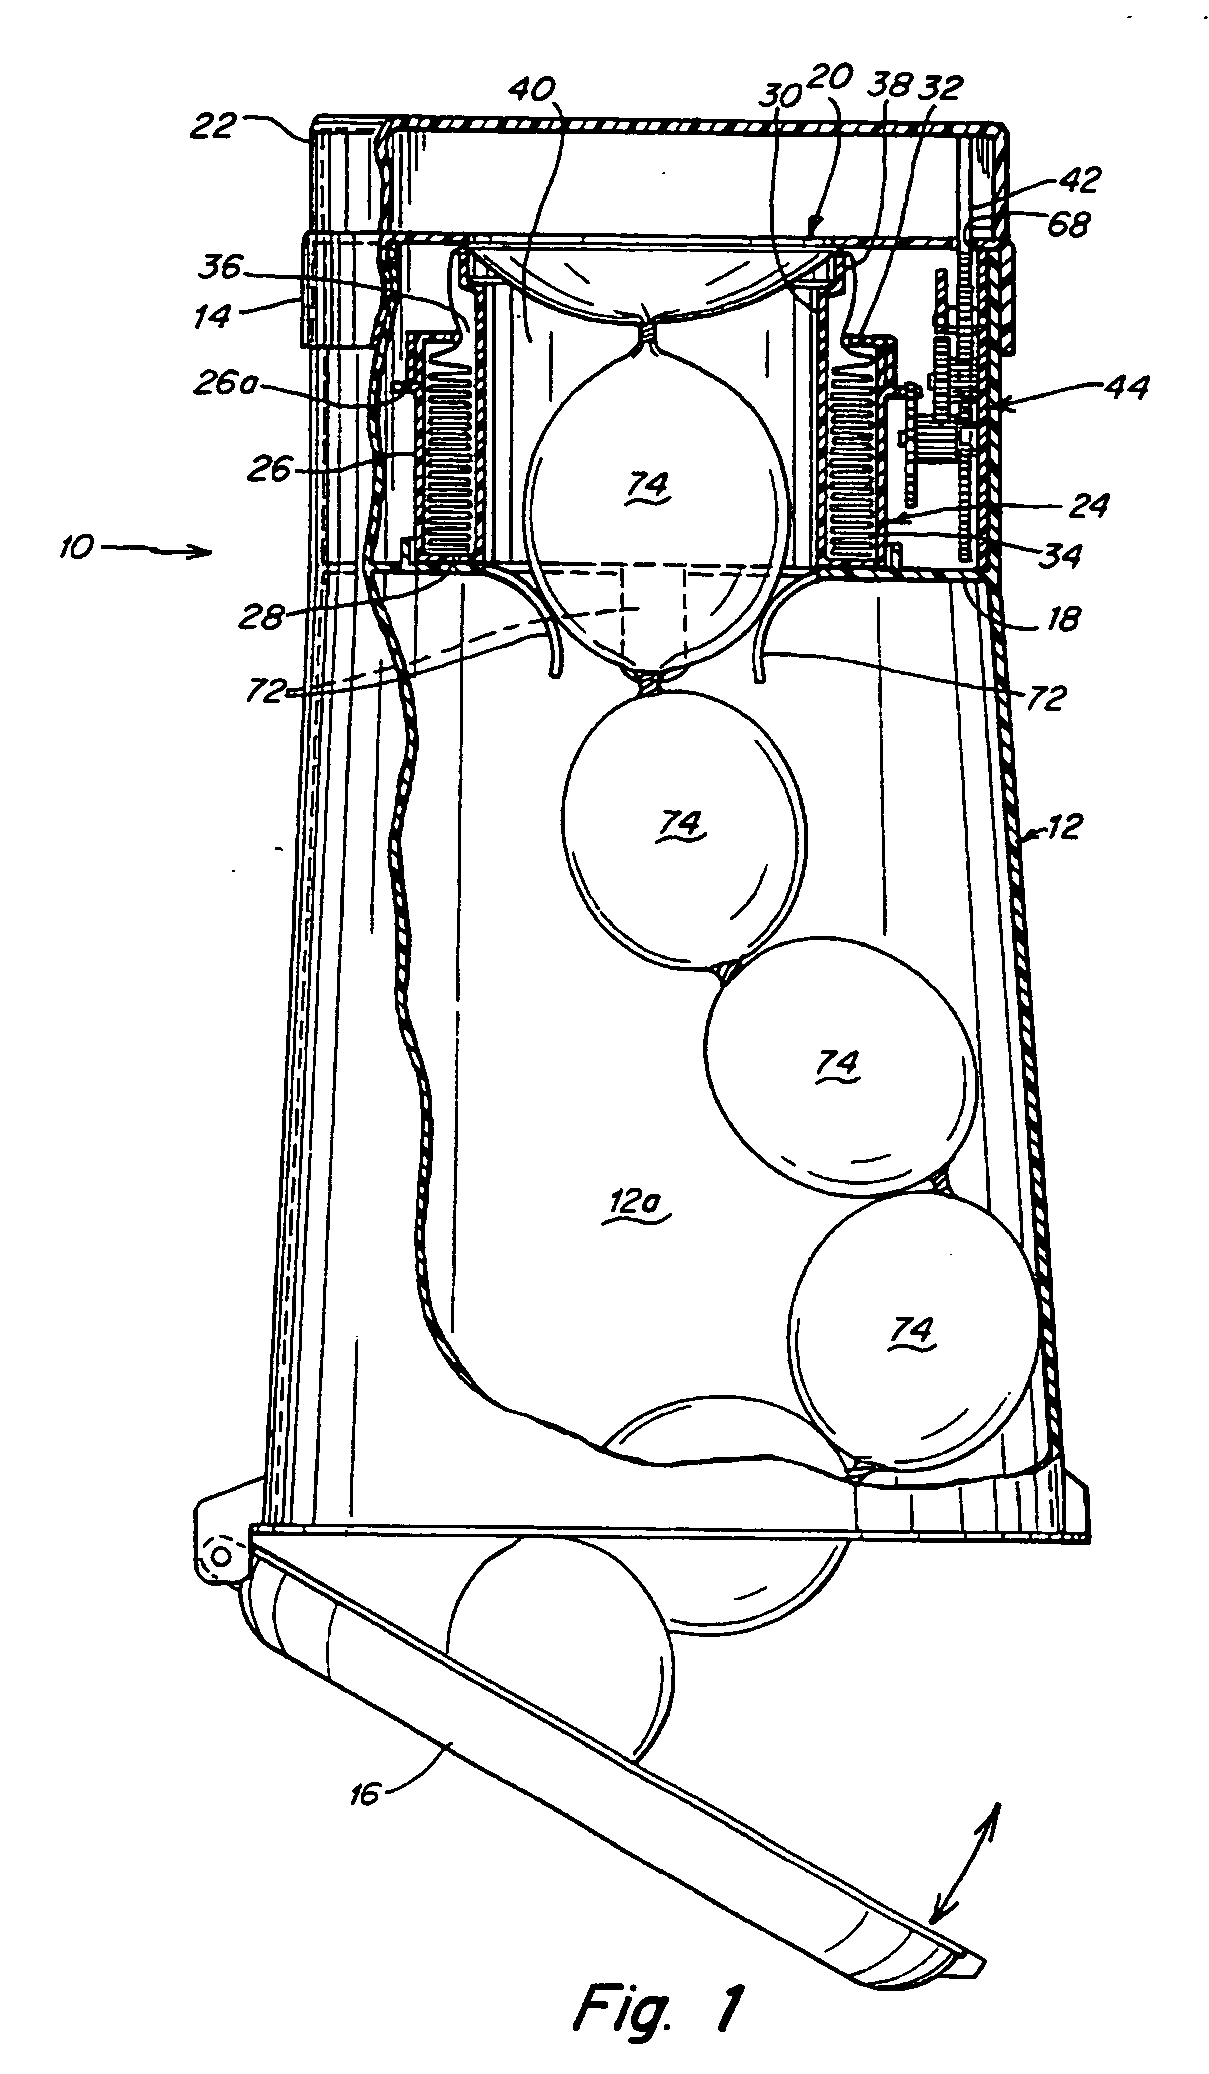 Waste disposal device including a geared rotating cartridge